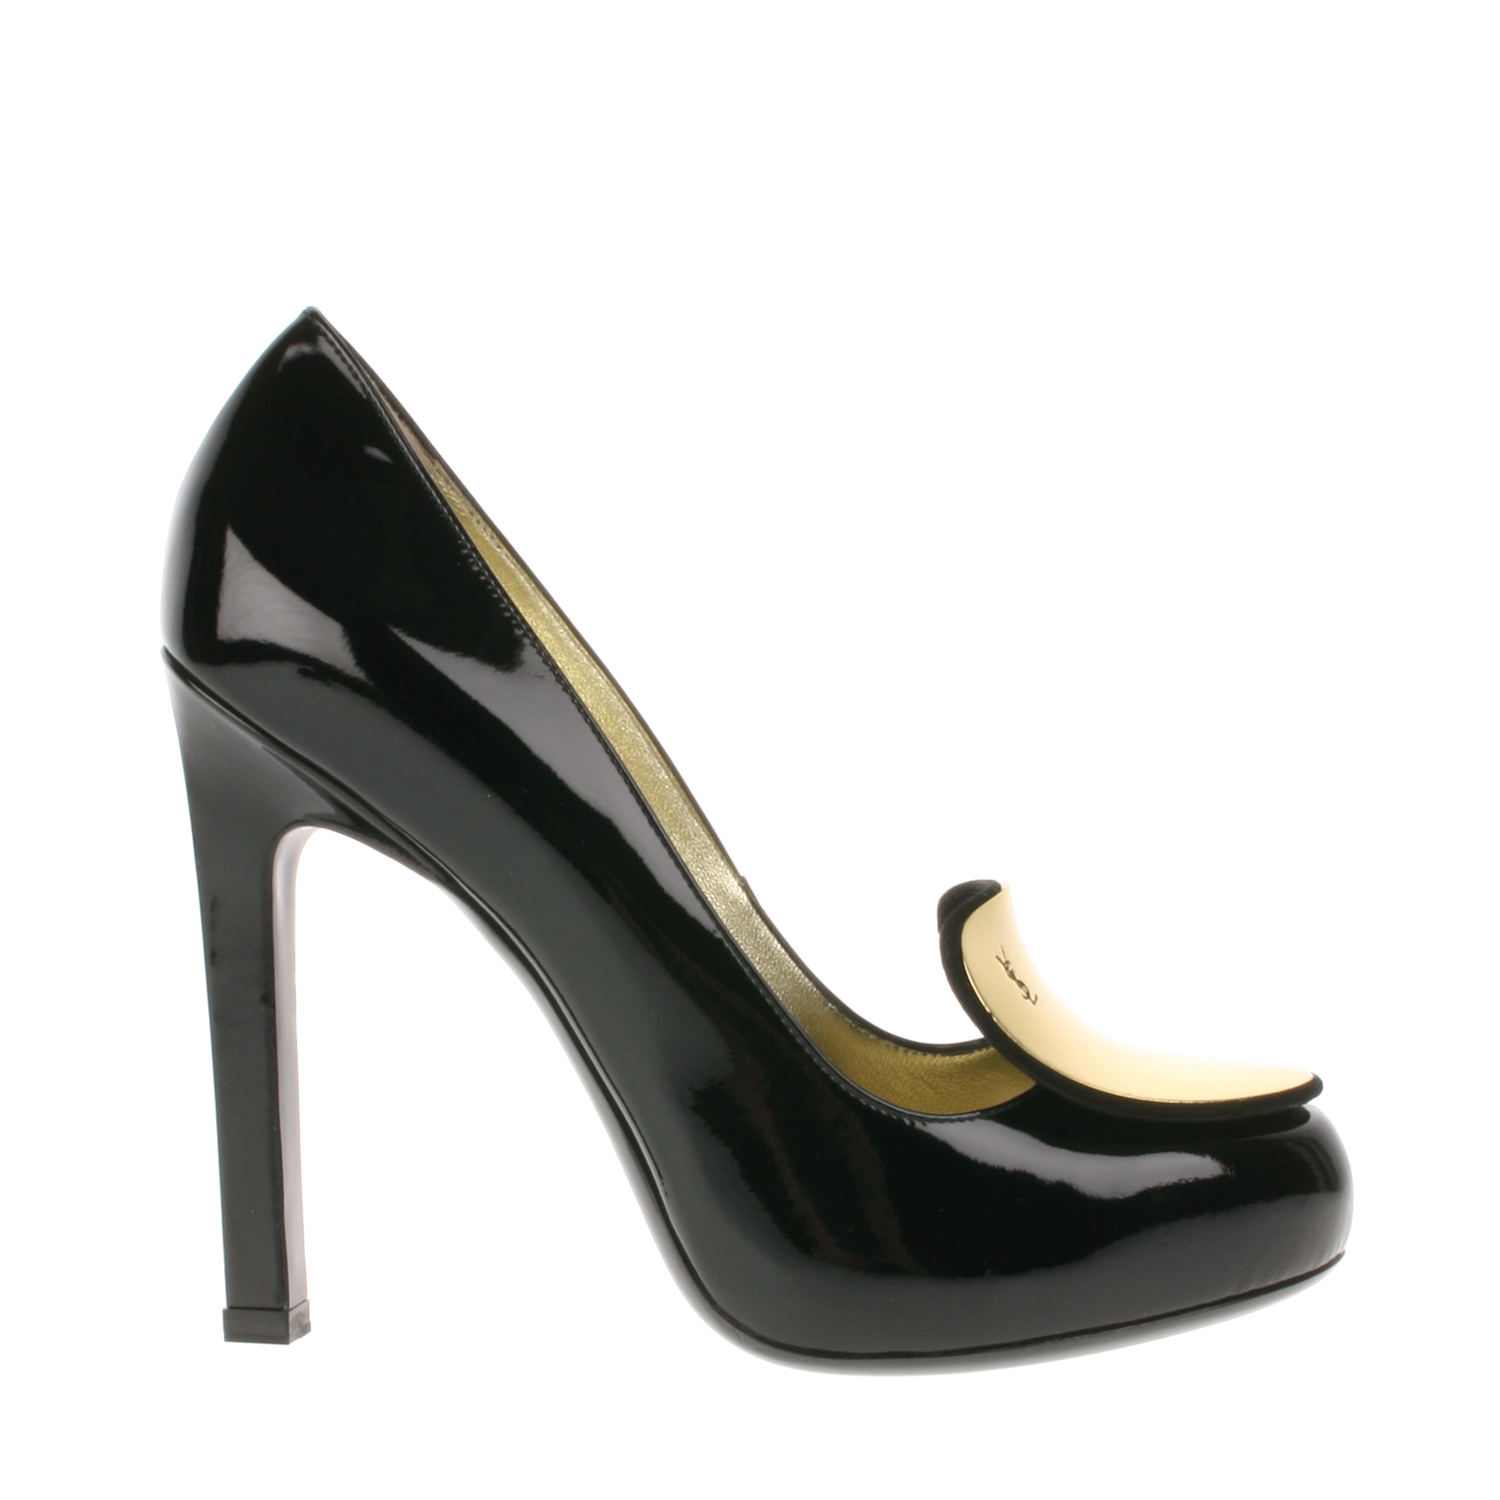 Saint Laurent Patent Leather Court Shoes in Gold | Lyst